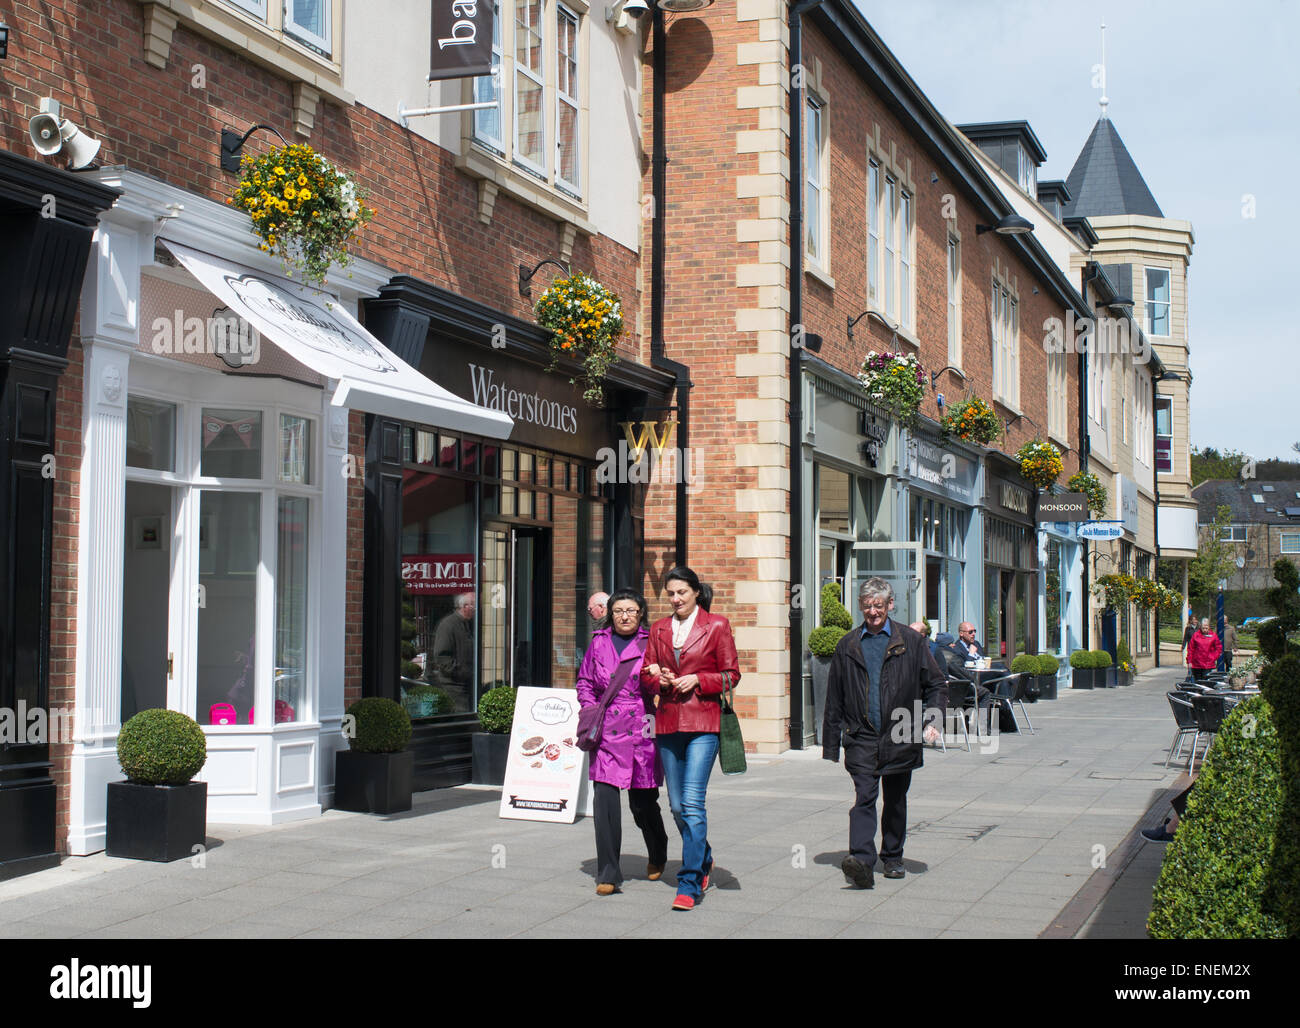 People walking through the Sanderson Arcade shopping centre, Morpeth, north east England, UK Stock Photo